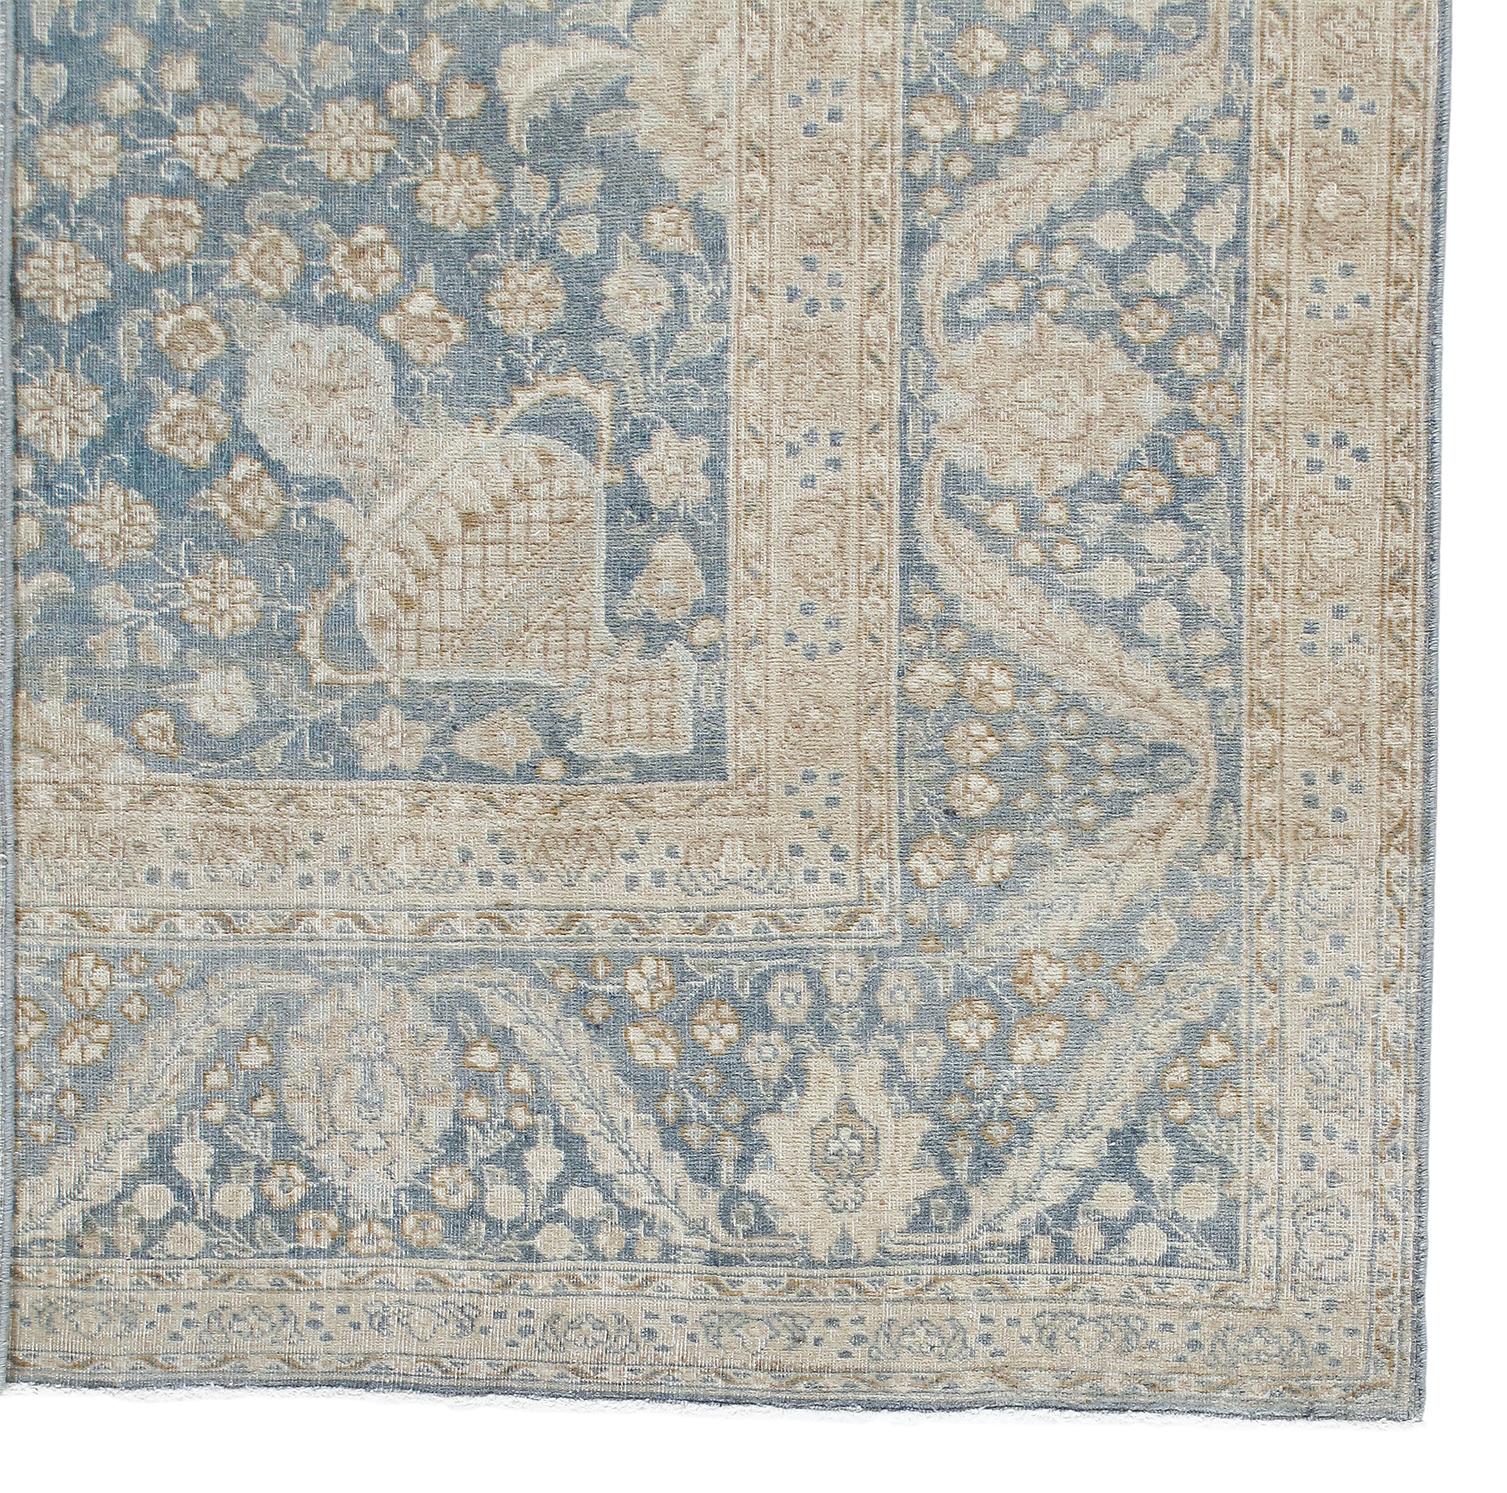 Early 20th Century Antique Persian Tabriz Blue Rug For Sale